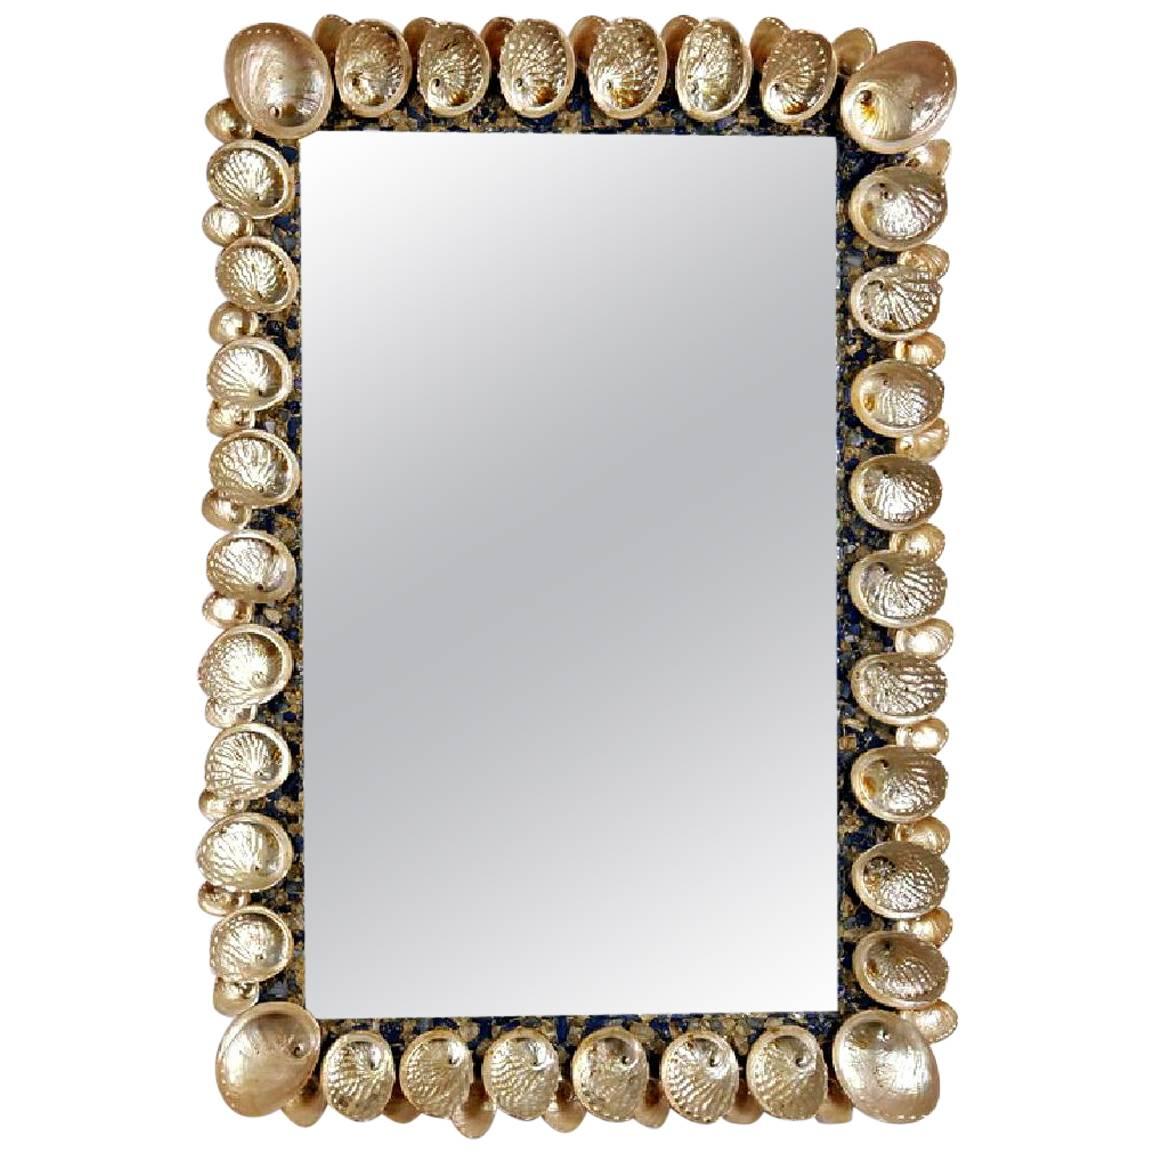 Large Mirror with Abalone Shells